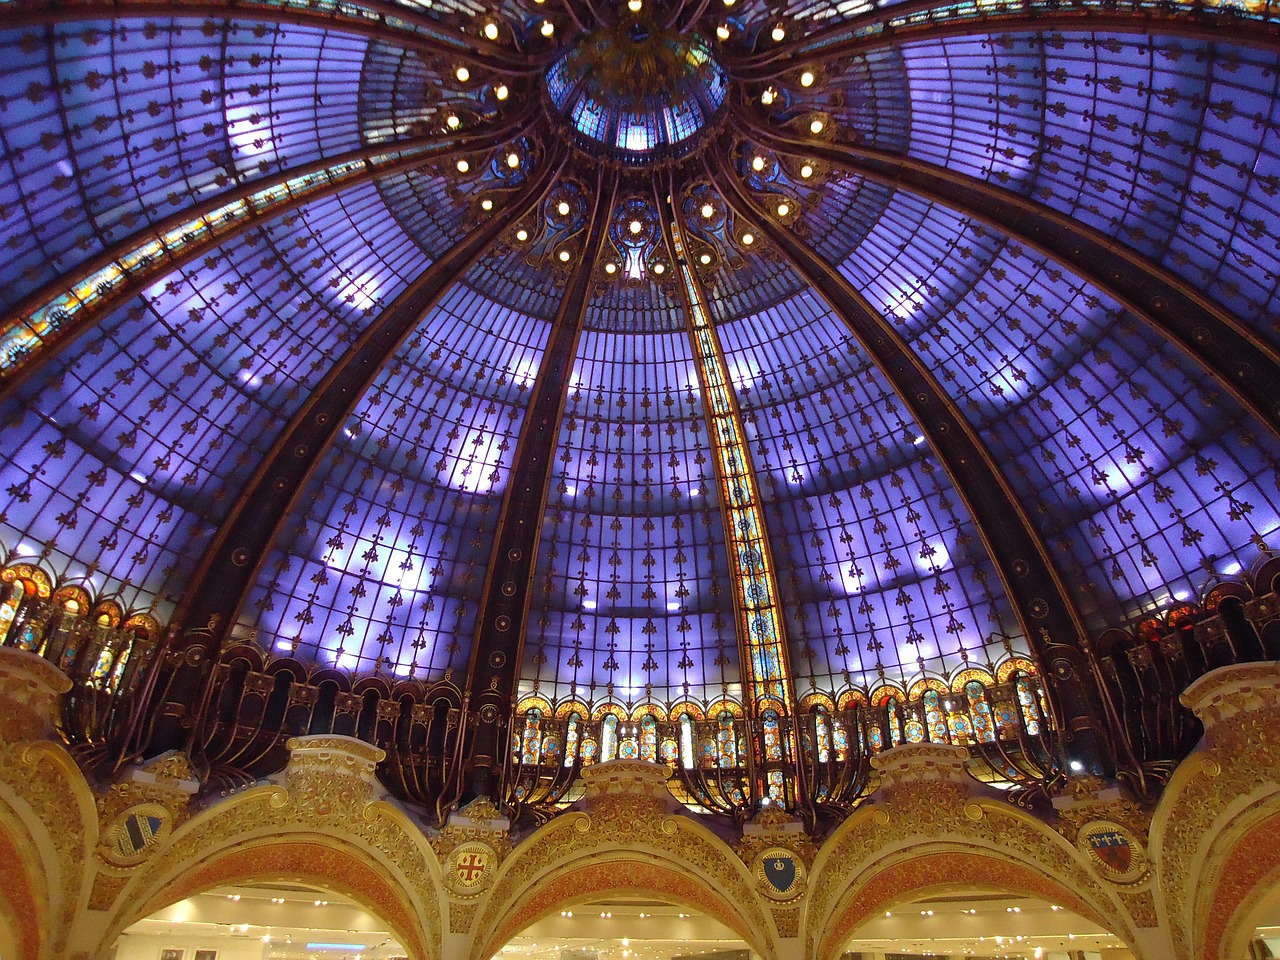 The Ultimate Guide to the Galeries Lafayette - Discover Walks Blog